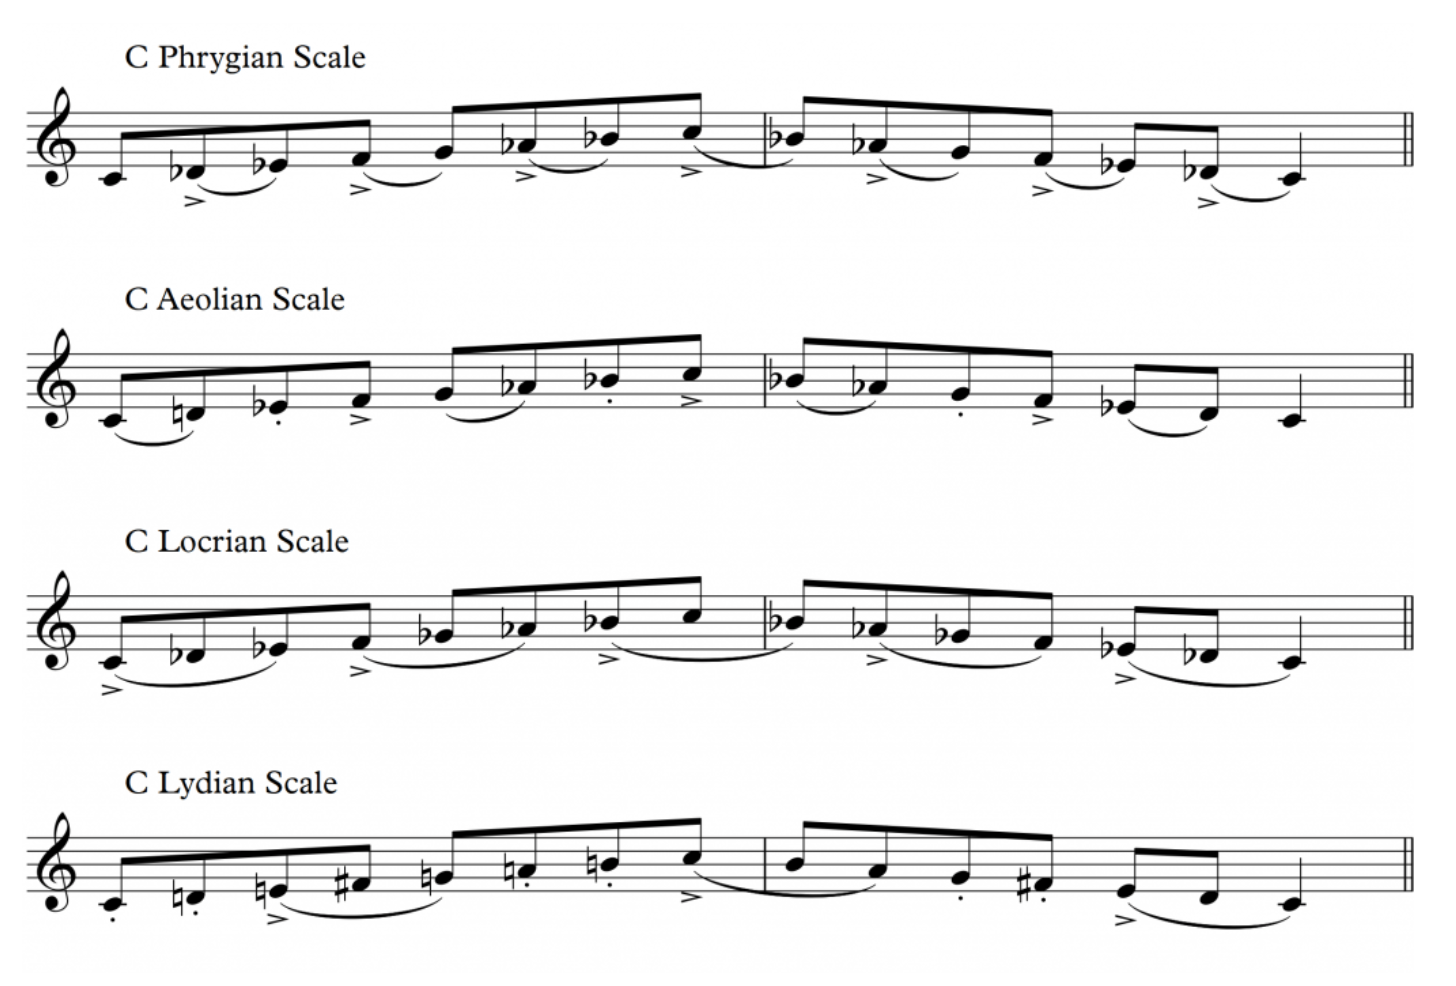 Articulations played over the Aeolian Mode, Phrygian Mode, Locrian Mode, and Lydian Mode 